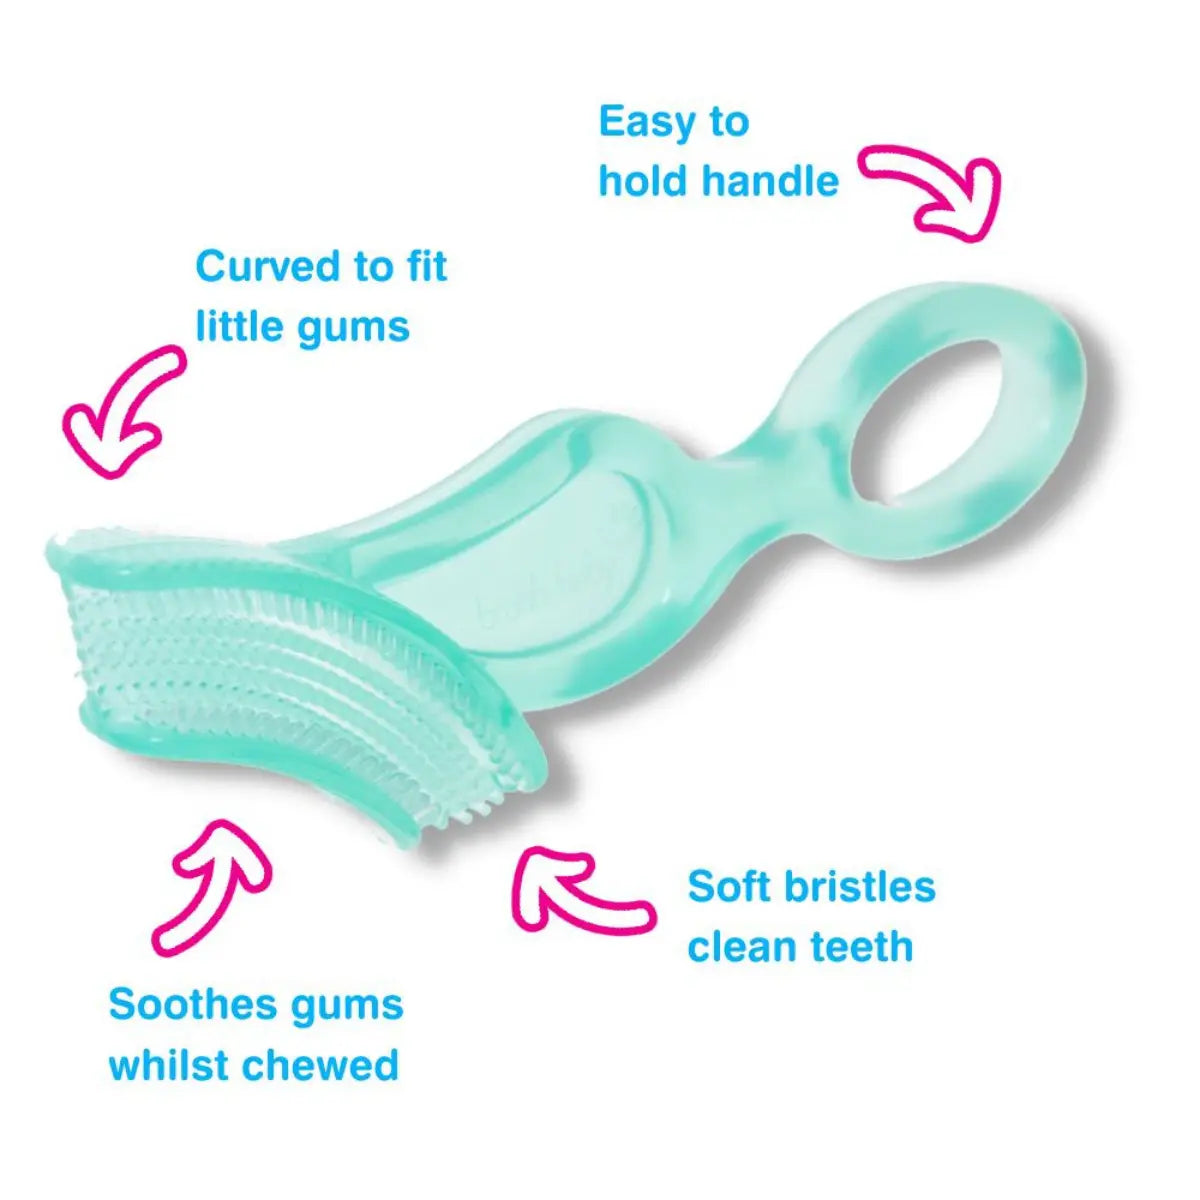 award-winning and innovative silicone baby first toothbrush and baby teether USP